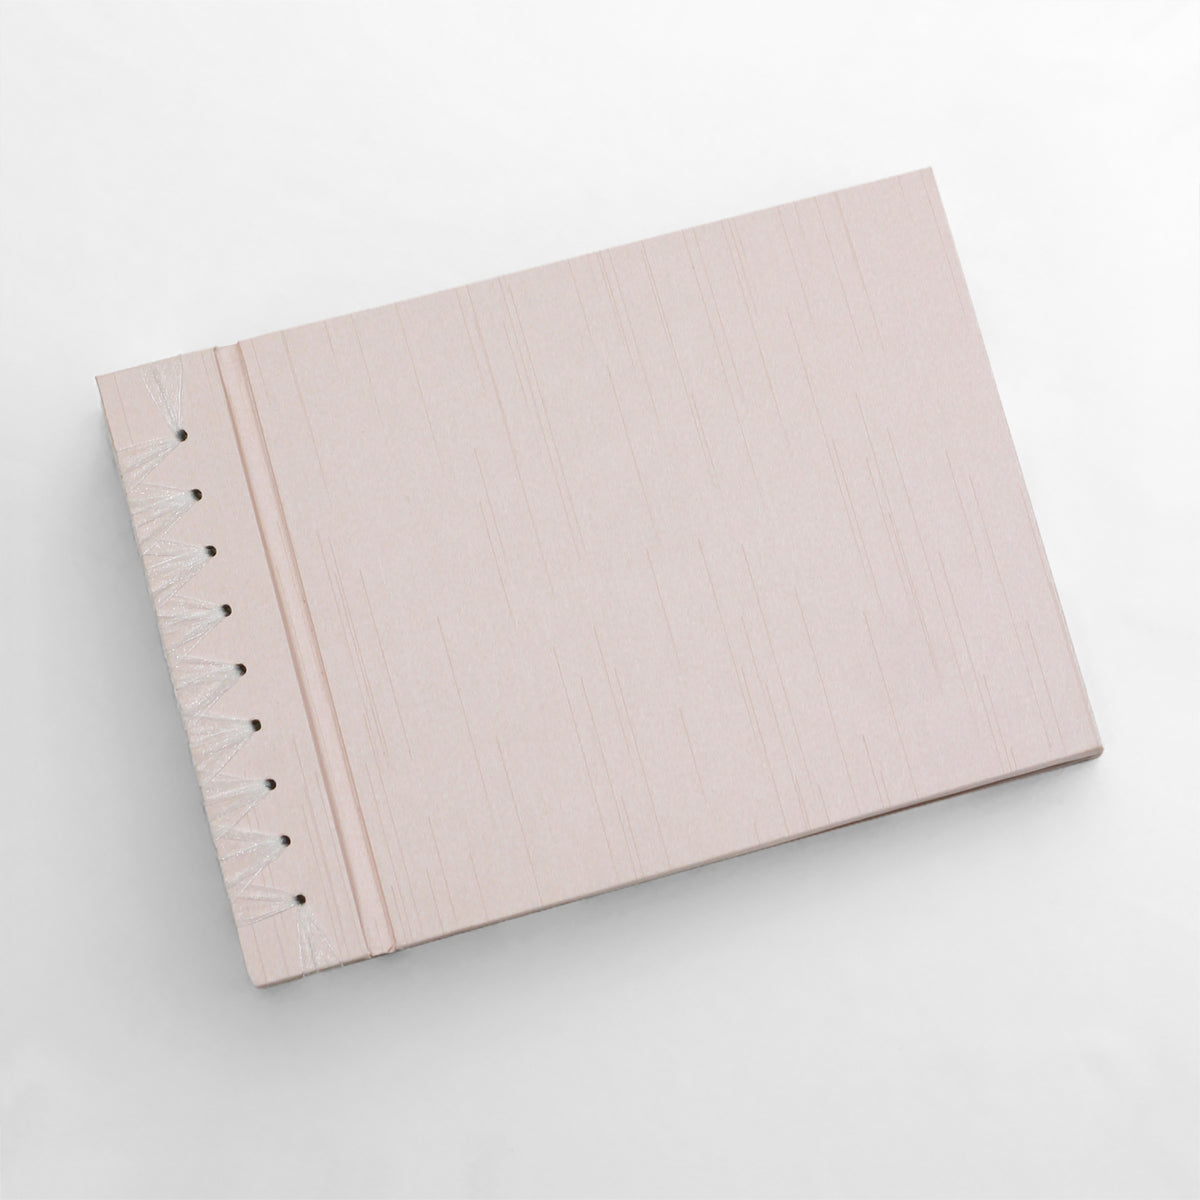 Large 10 x 15 Paper Page Album | Cover: Blush Pink Silk | Available Personalized